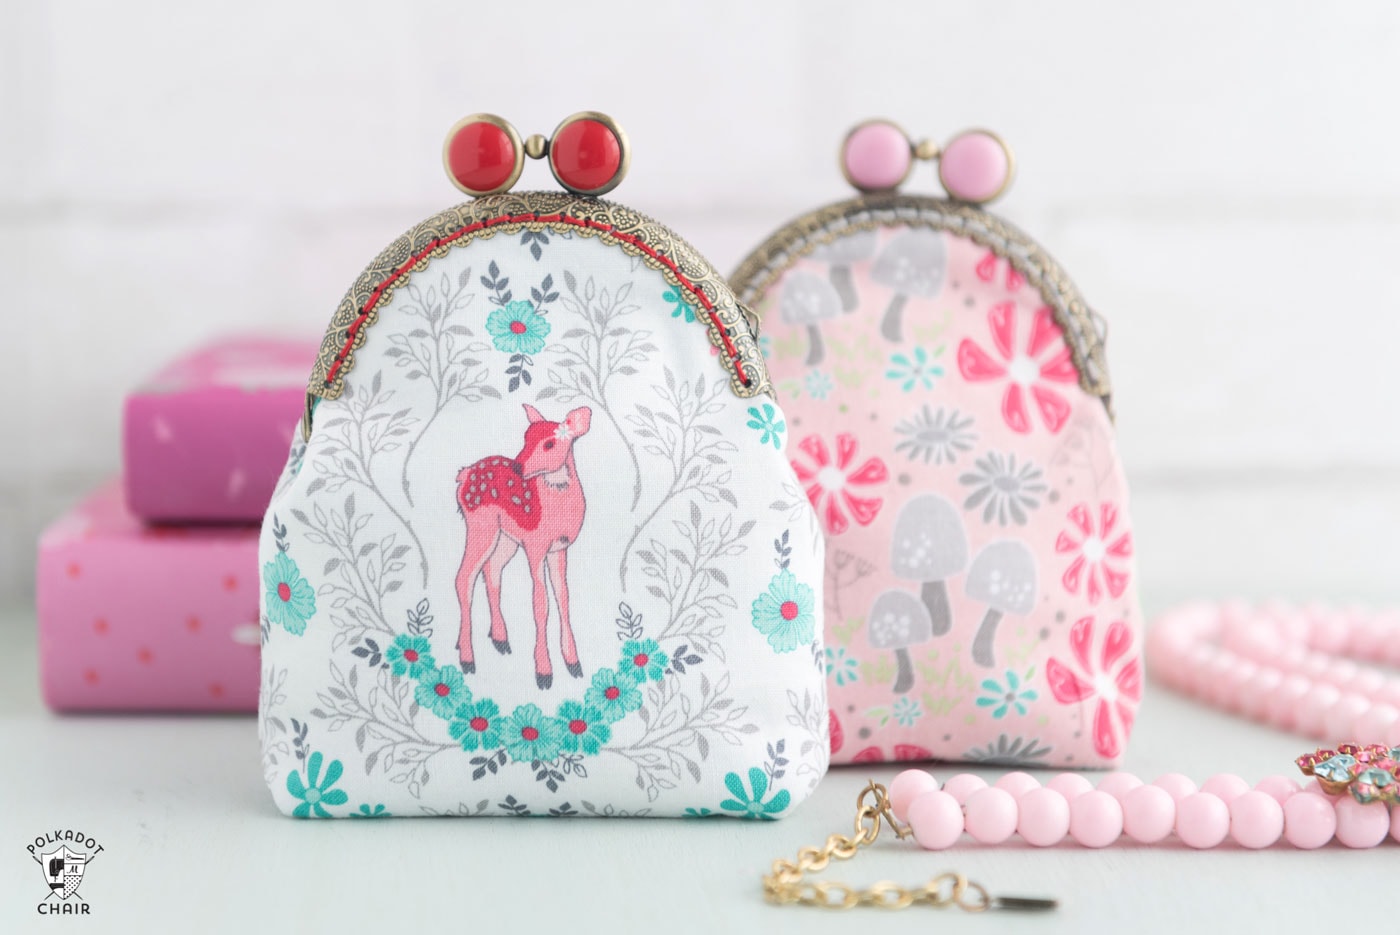 Metal Frame Purse with Embroidered Fabric – Free Sewing Pattern